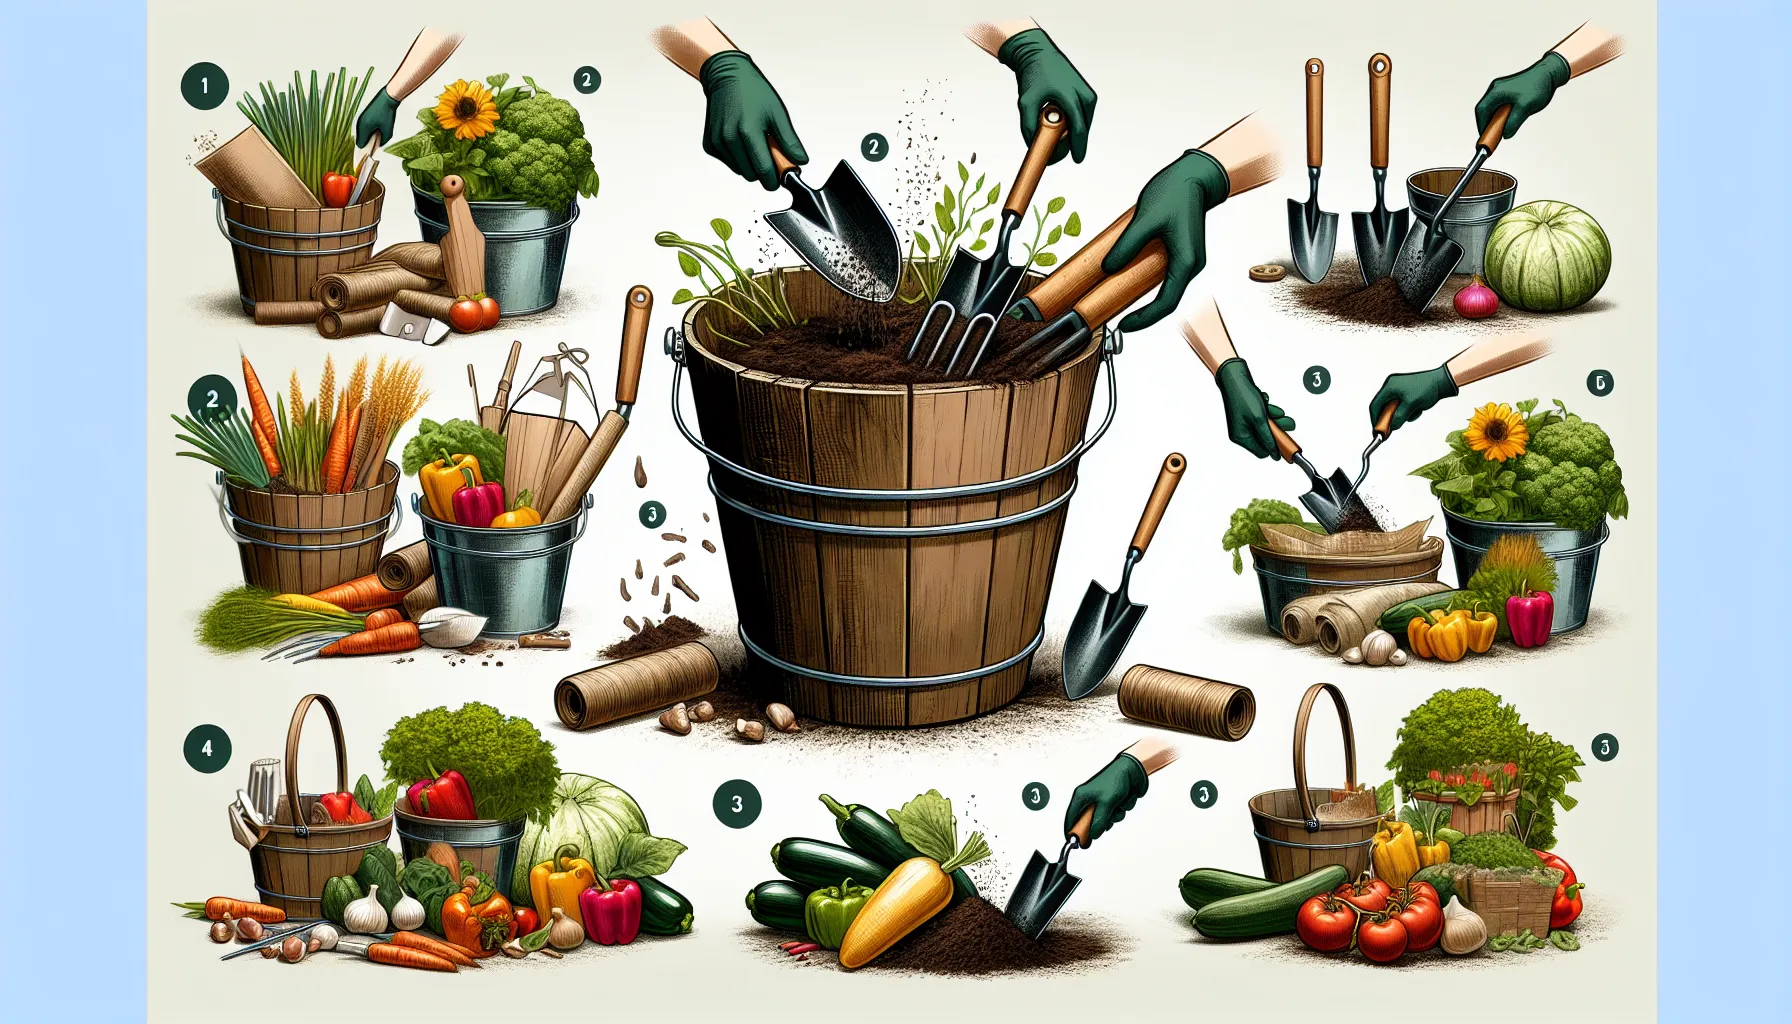 Illustration of multiple gardeners' buckets filled with various vegetables, gardening tools, and hands performing gardening tasks.